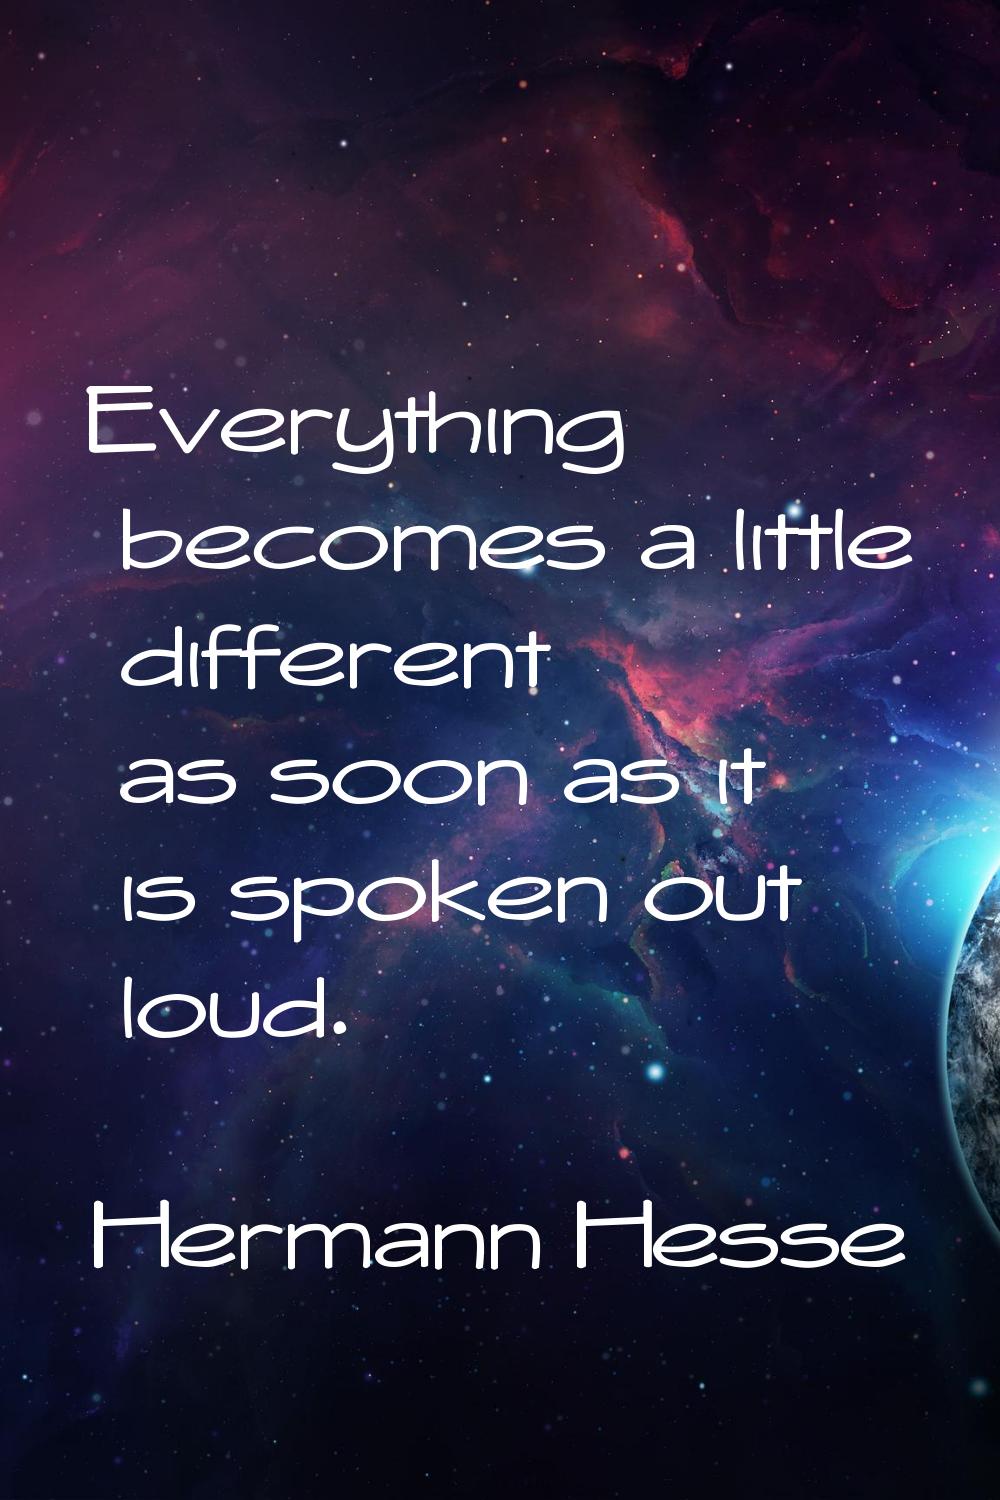 Everything becomes a little different as soon as it is spoken out loud.